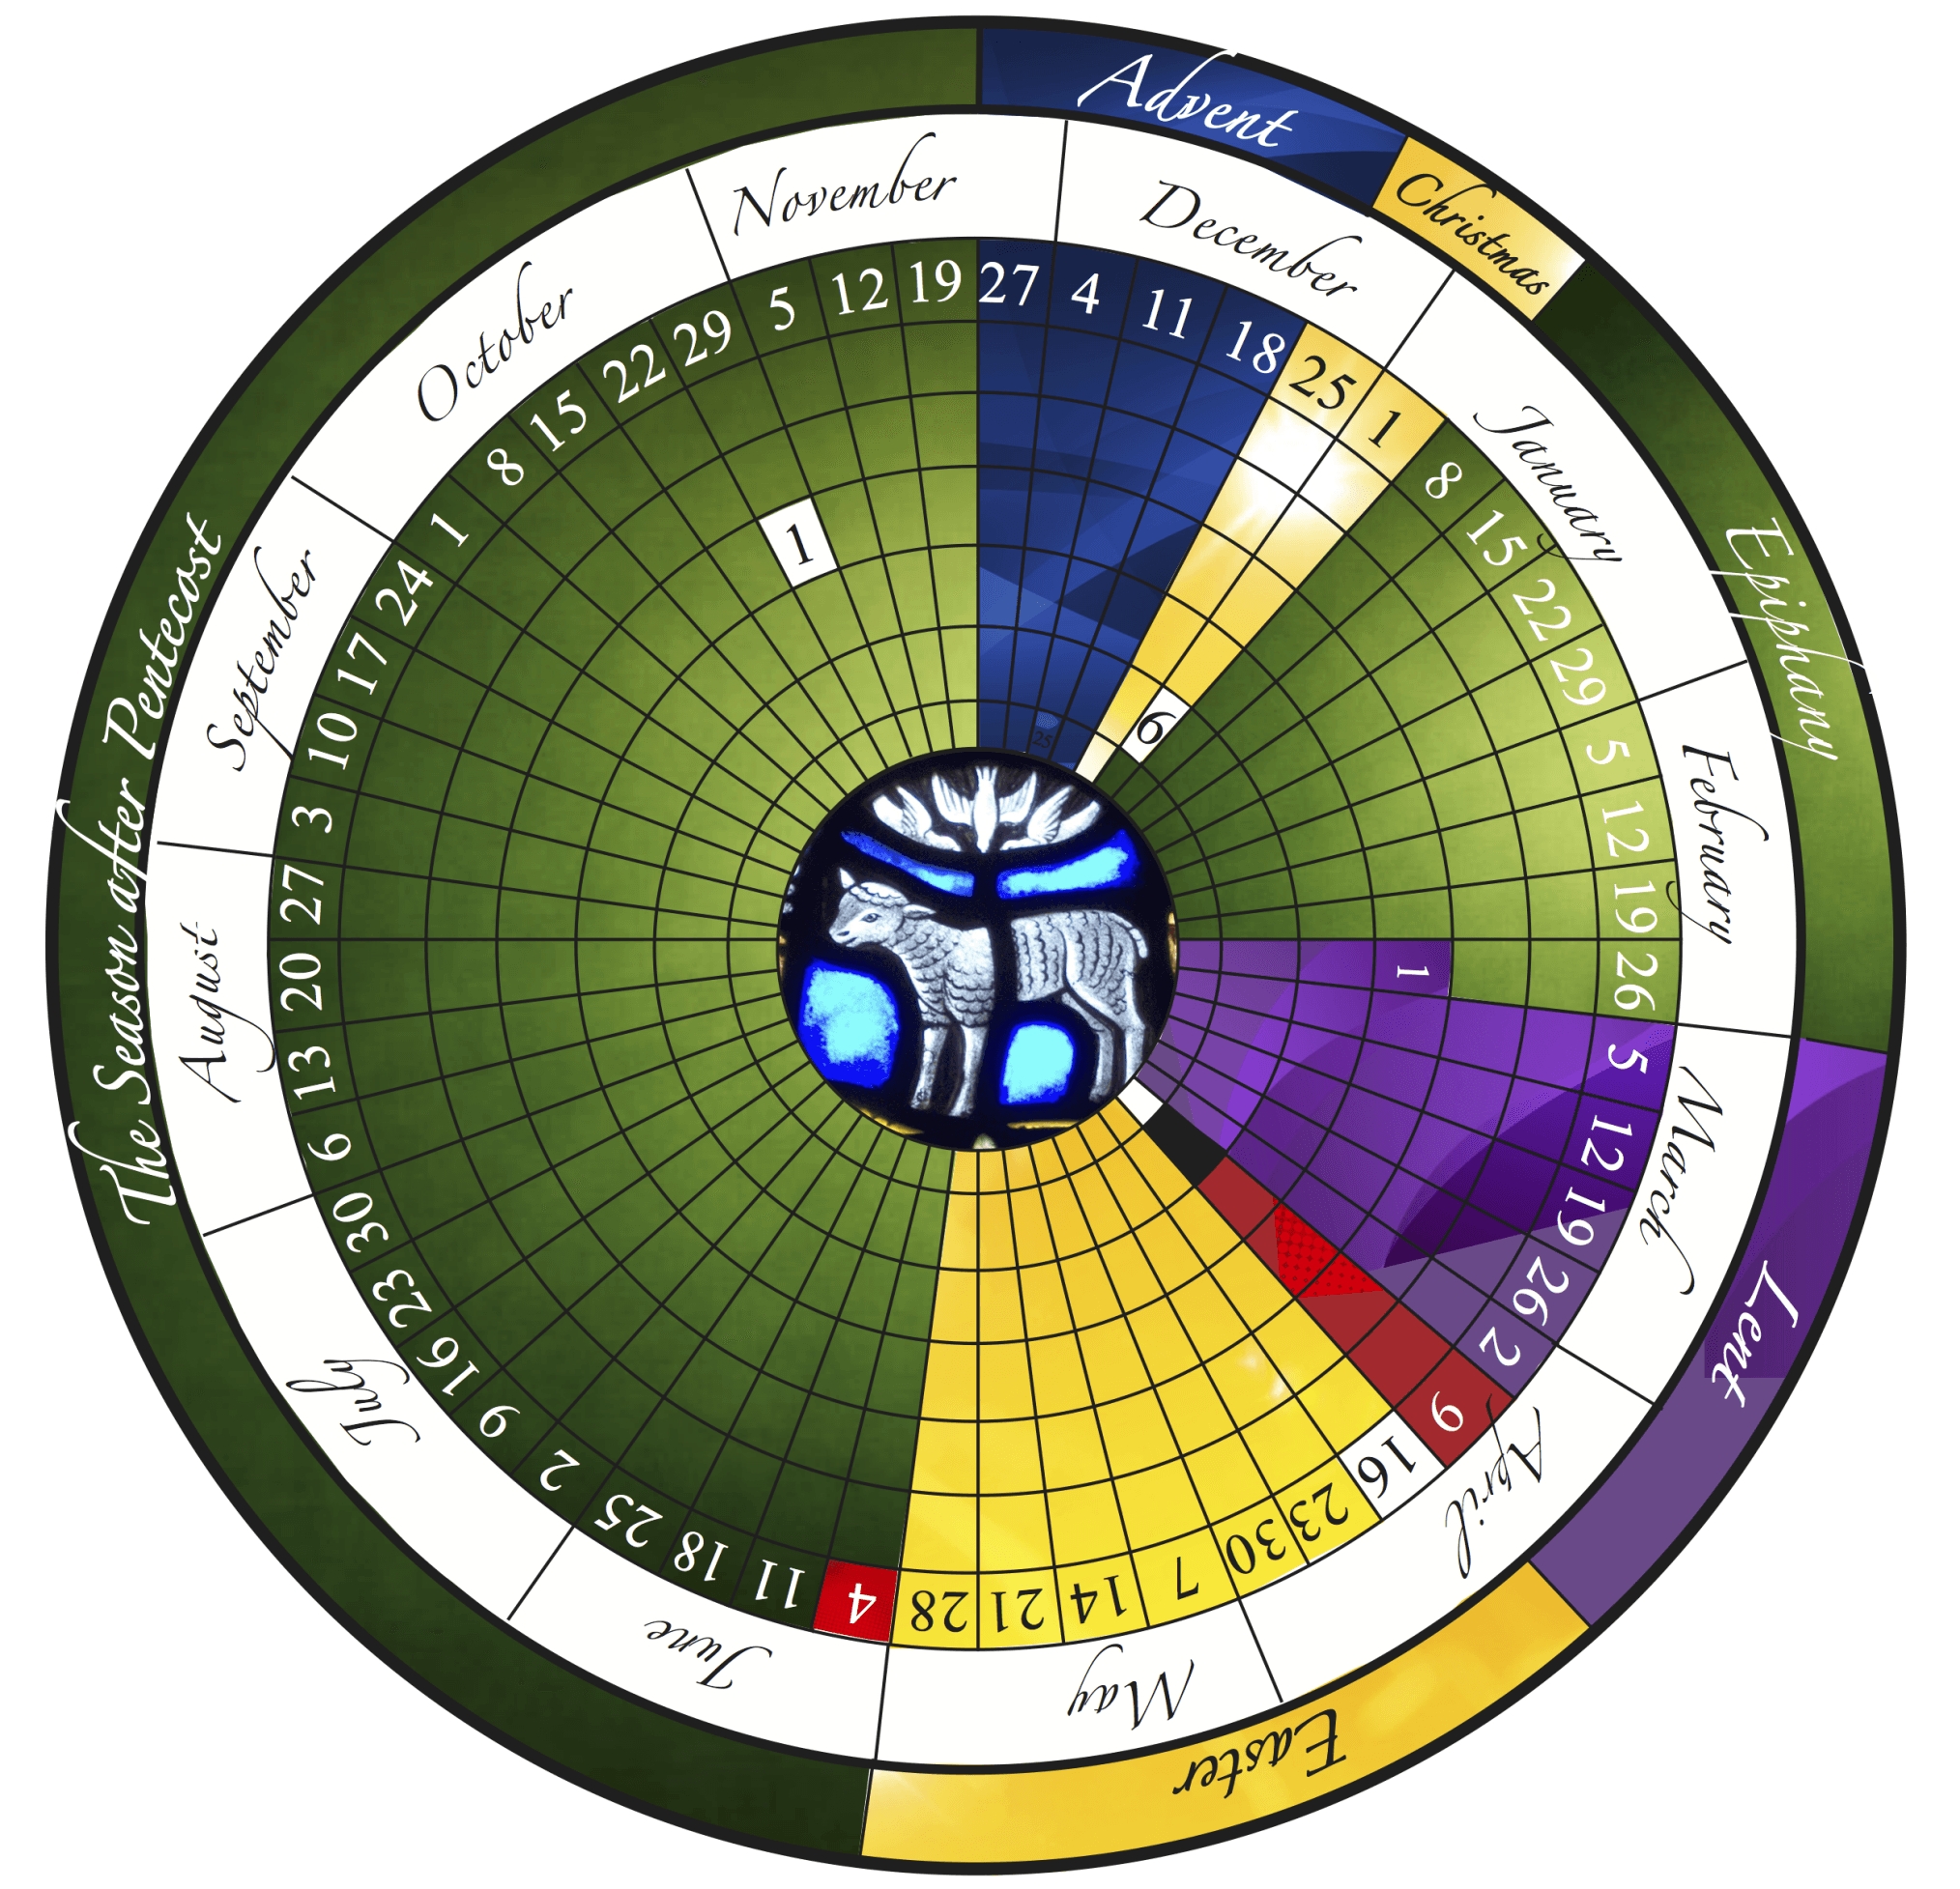 The Liturgical Year Explained (Plus Free Printable Calendar!) pertaining to Anglican Liturgical Calendar Printable 2020